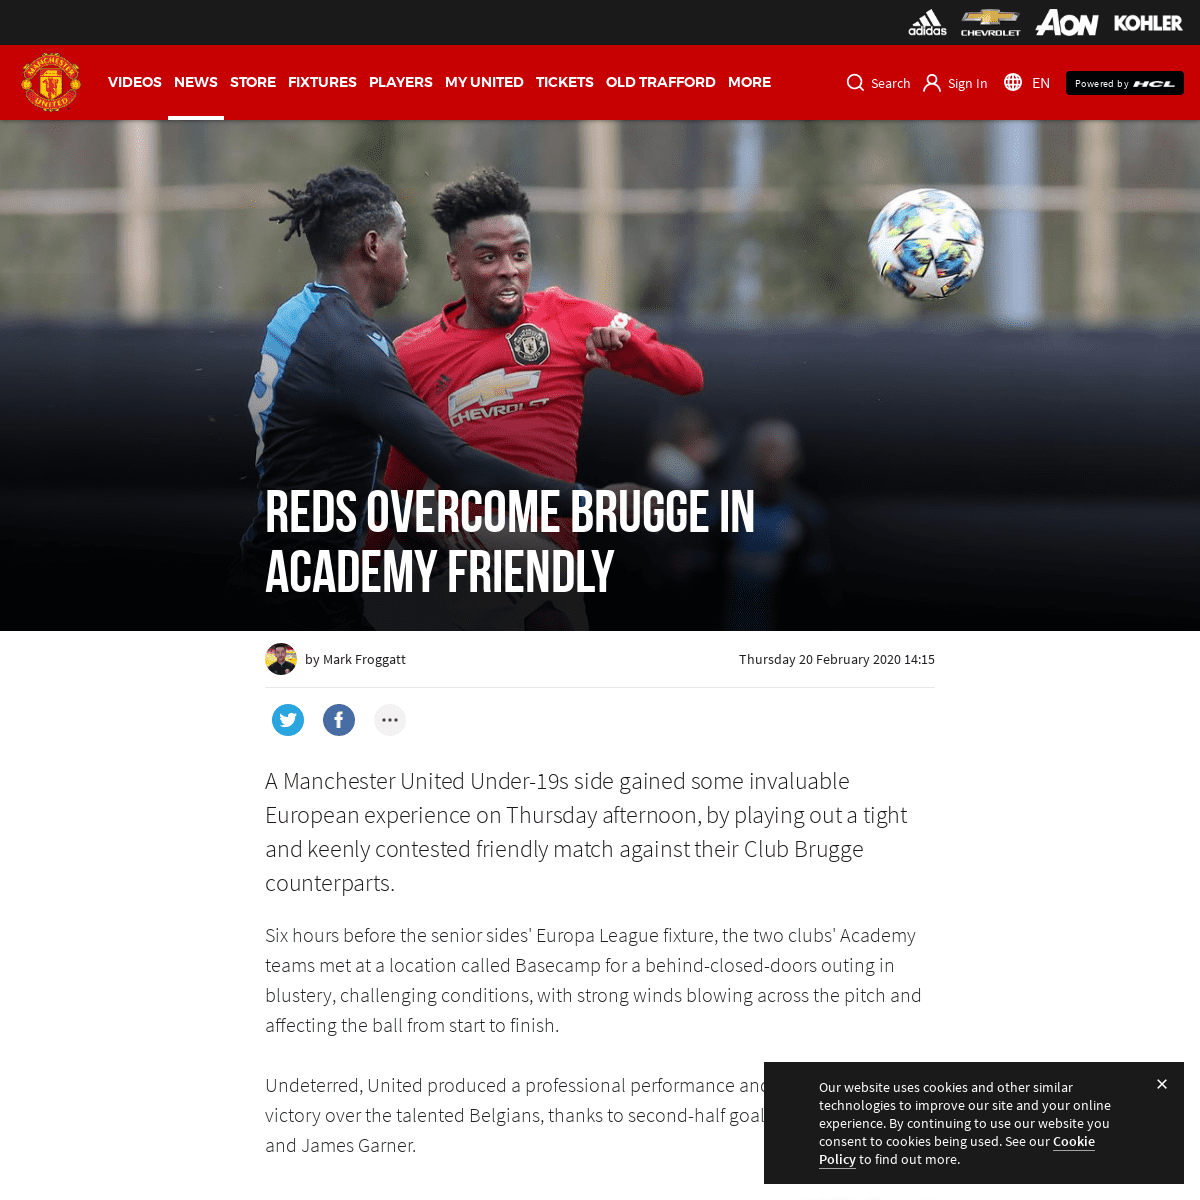 A complete backup of www.manutd.com/en/news/detail/academy-friendly-club-brugge-0-manchester-united-2-match-report